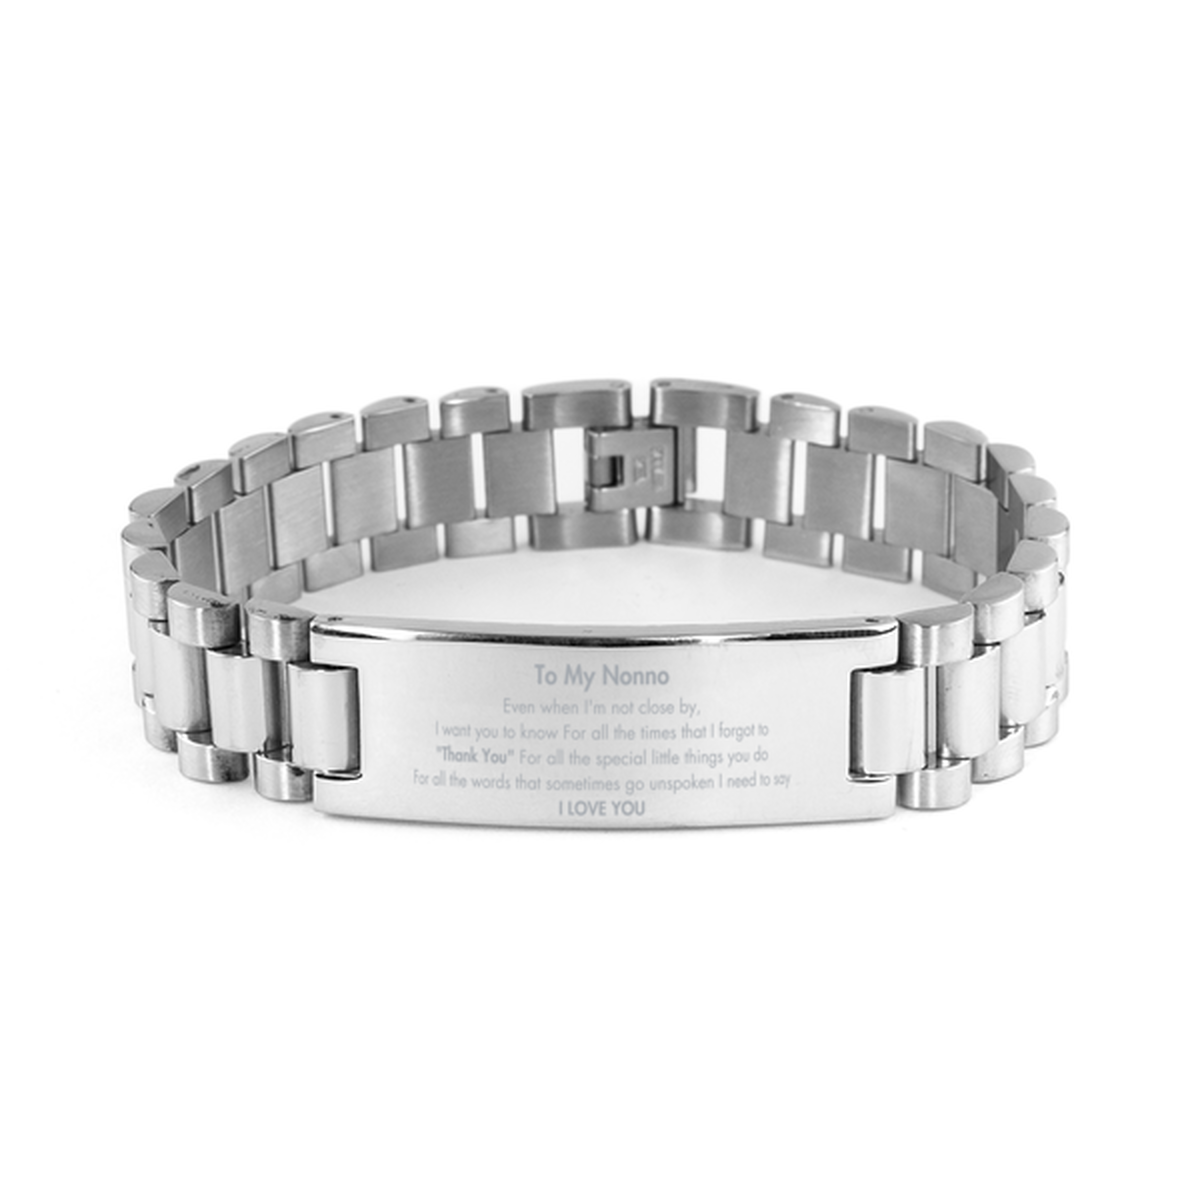 Thank You Gifts for Nonno, Keepsake Ladder Stainless Steel Bracelet Gifts for Nonno Birthday Mother's day Father's Day Nonno For all the words That sometimes go unspoken I need to say I LOVE YOU